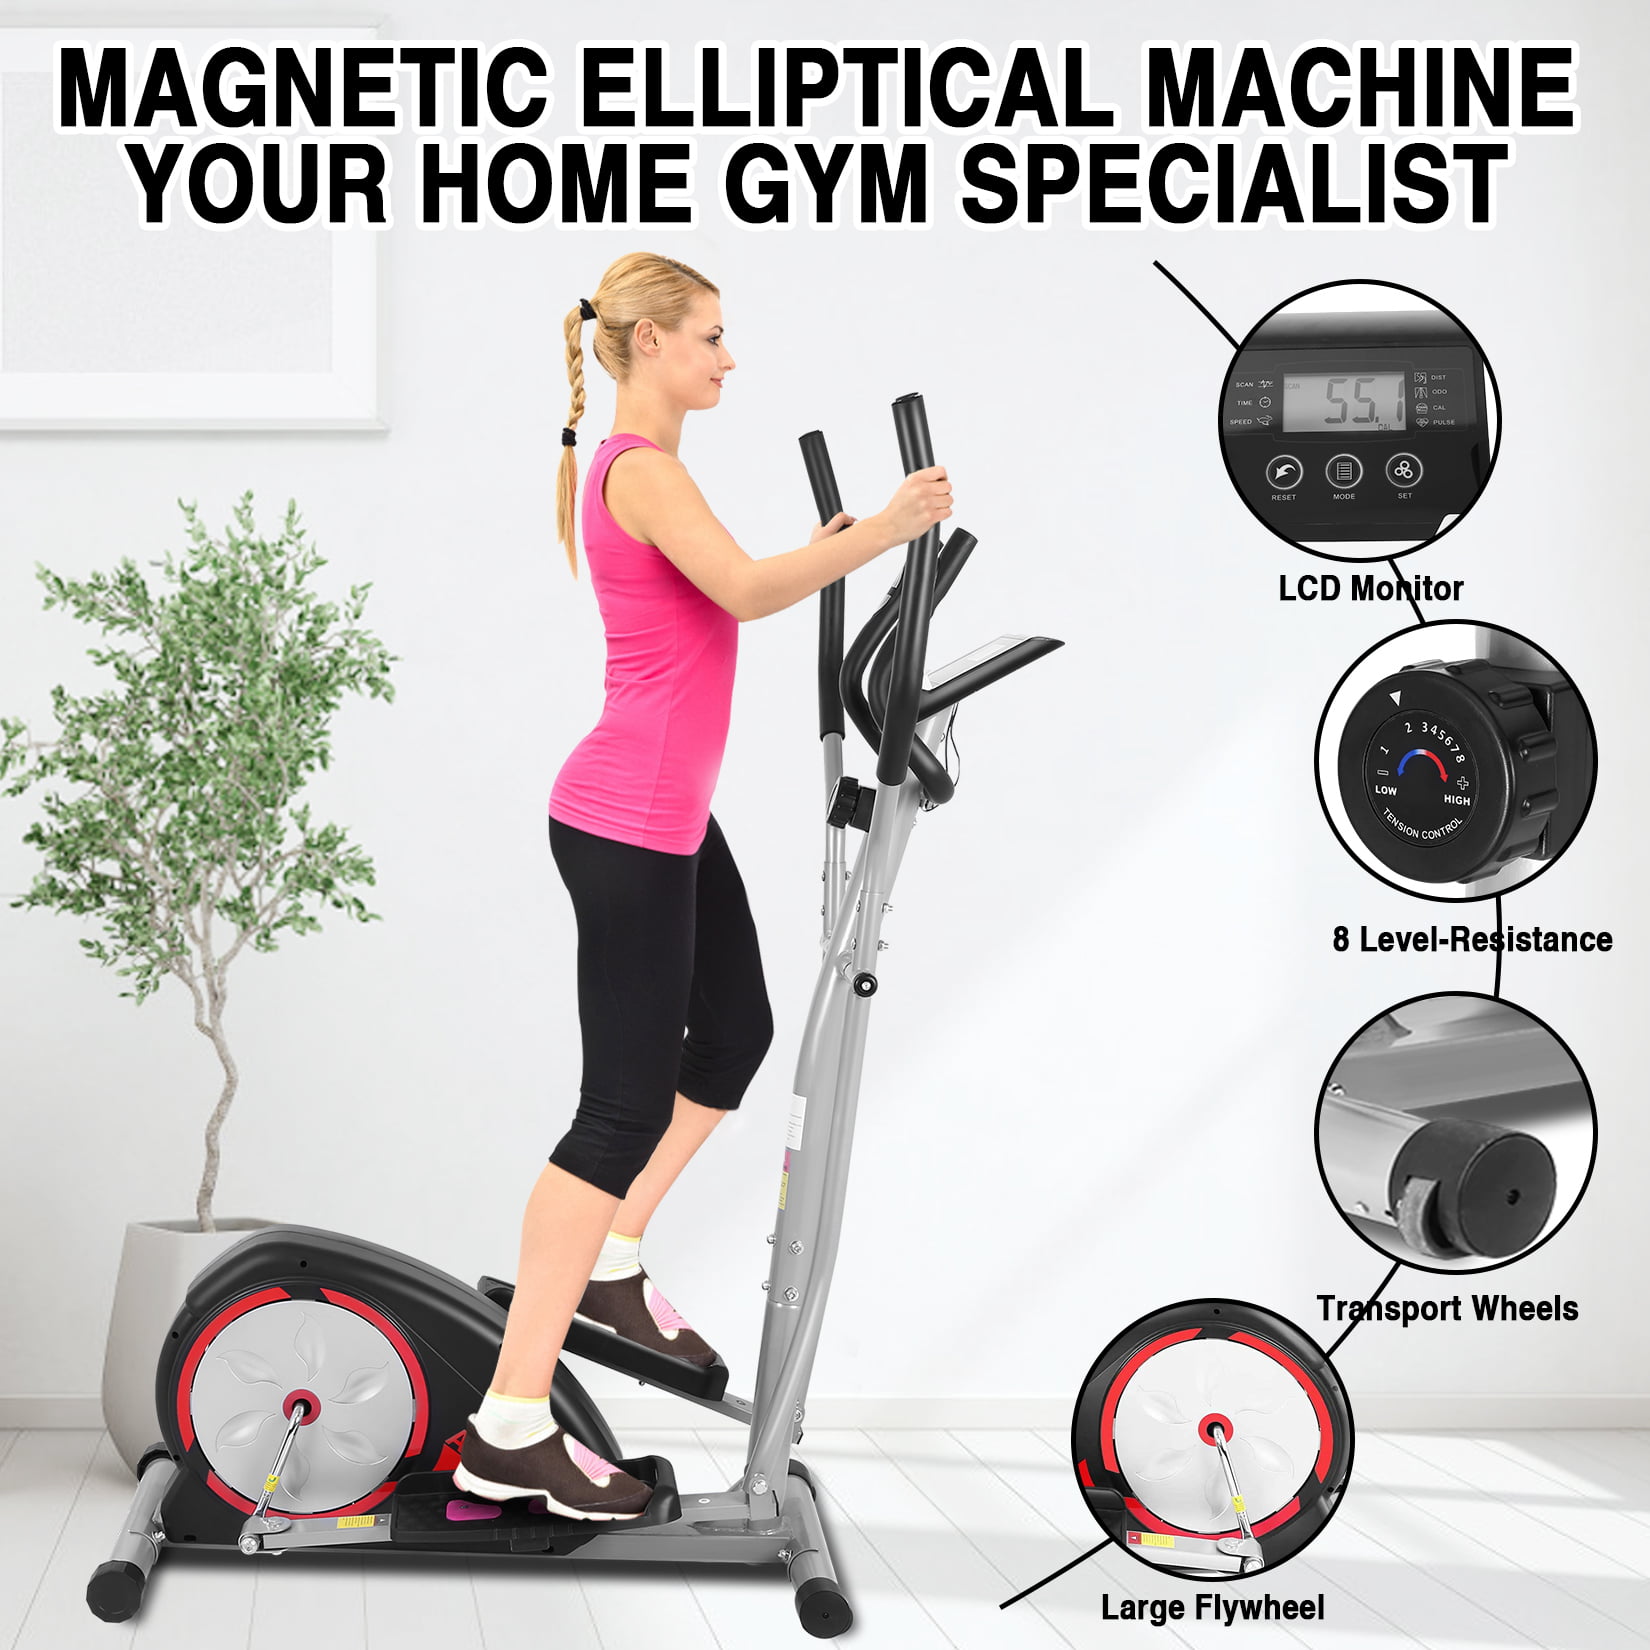 Details about   ANCHEER Magnetic Elliptical Exercise Fitness Training Machine Home Gym Cardio! 